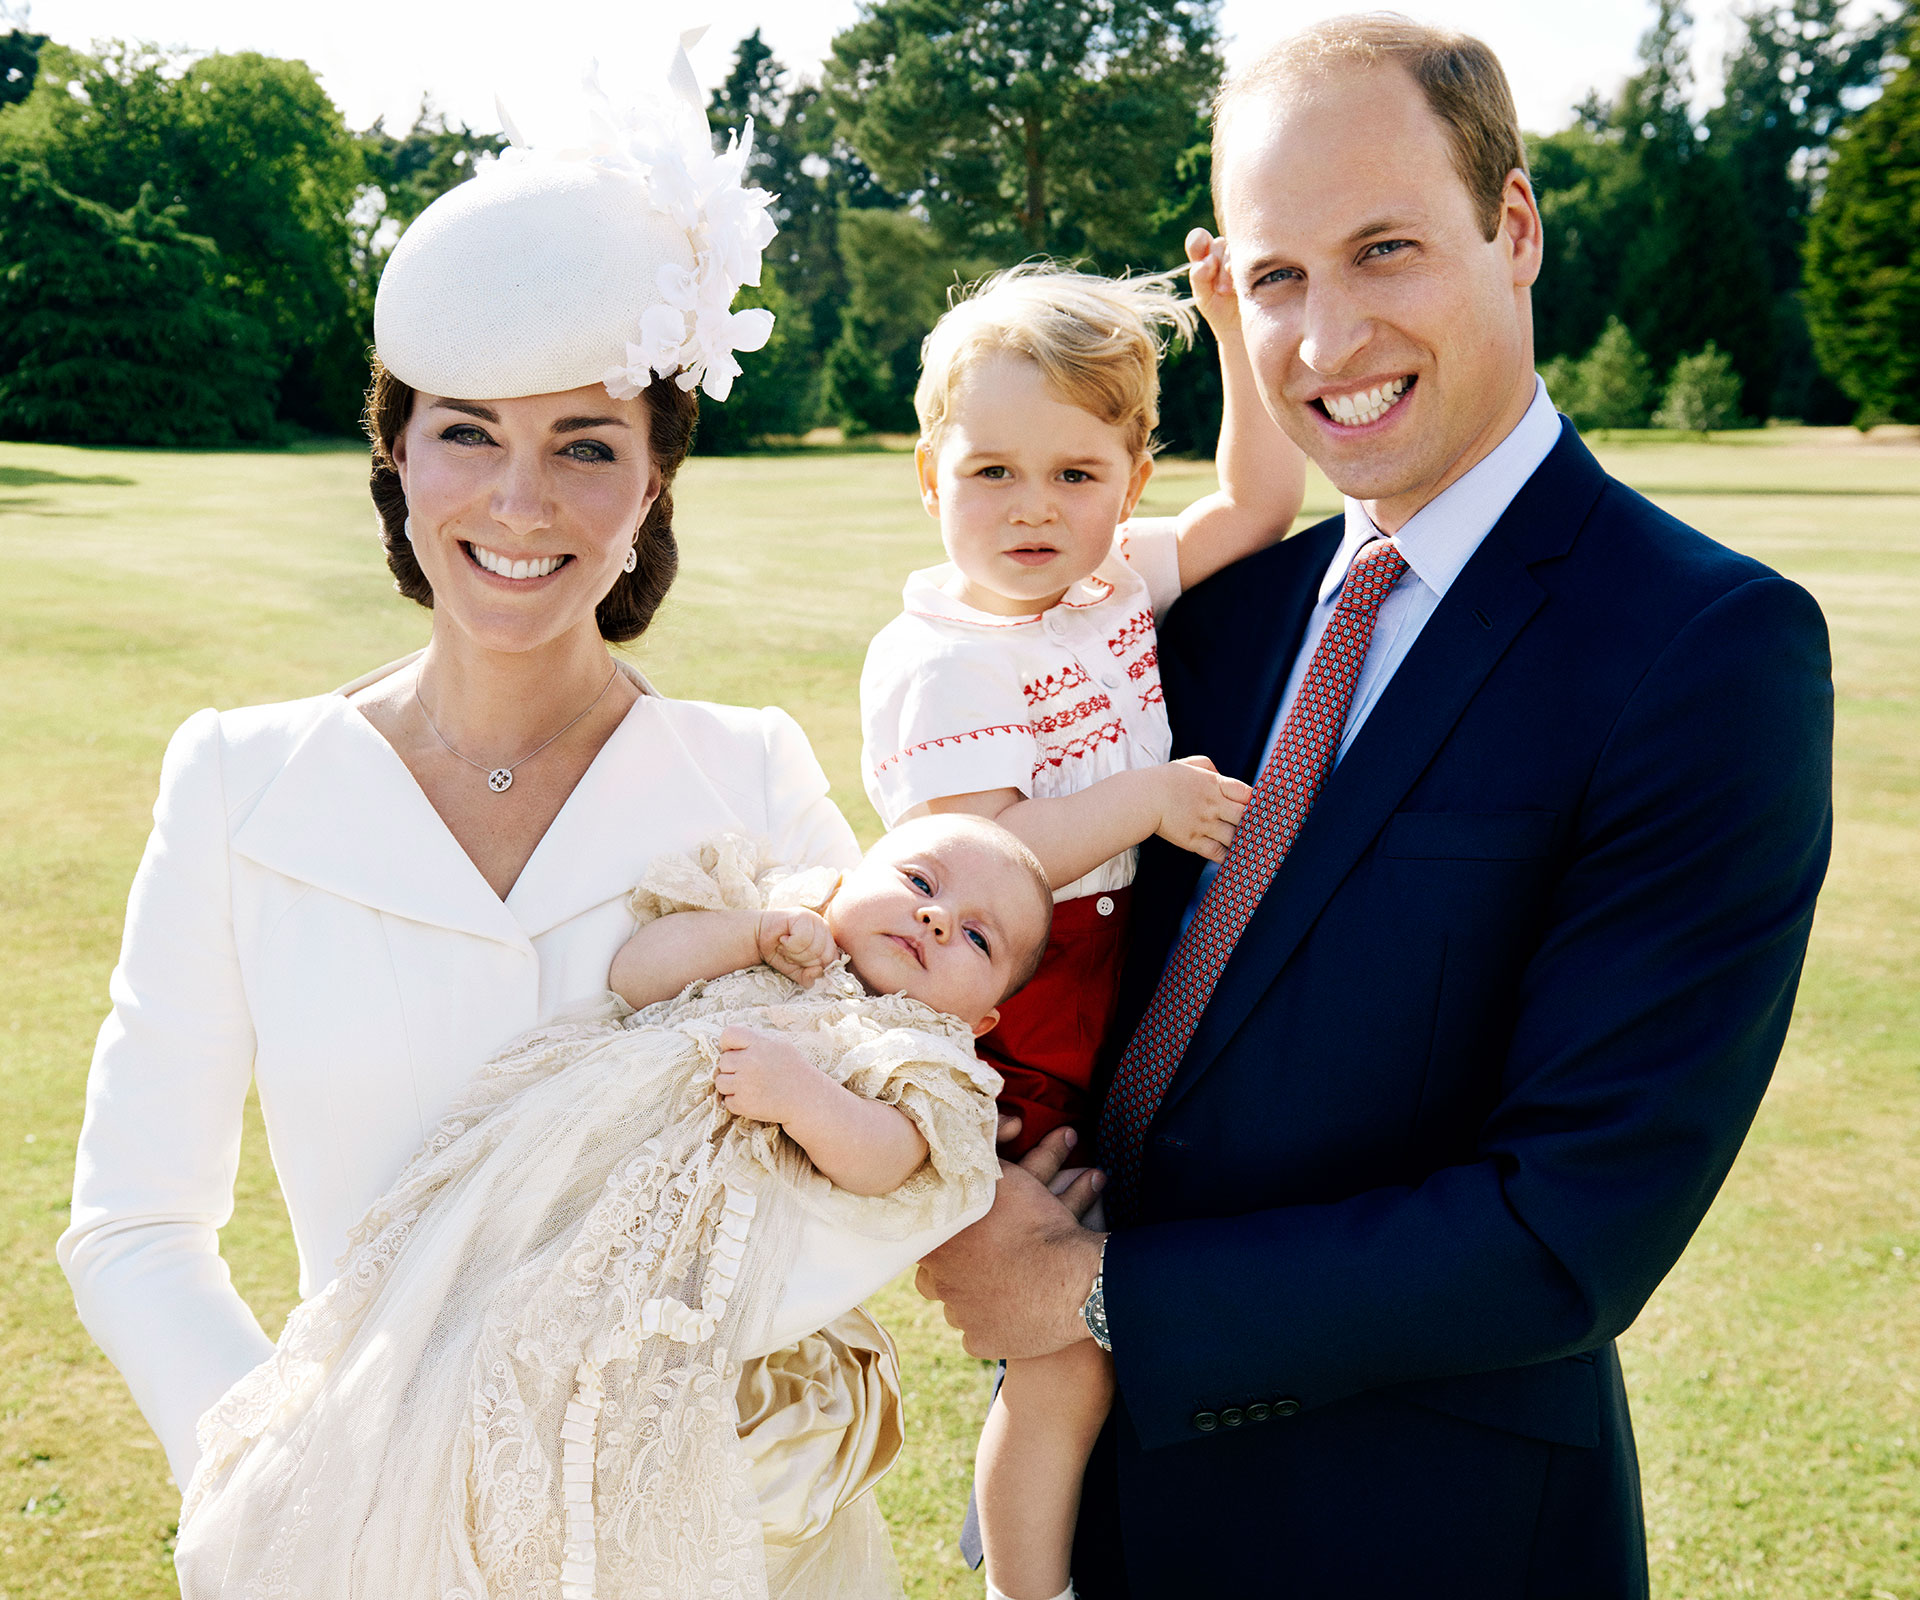 Prince William: ‘Kate is an amazing mum’